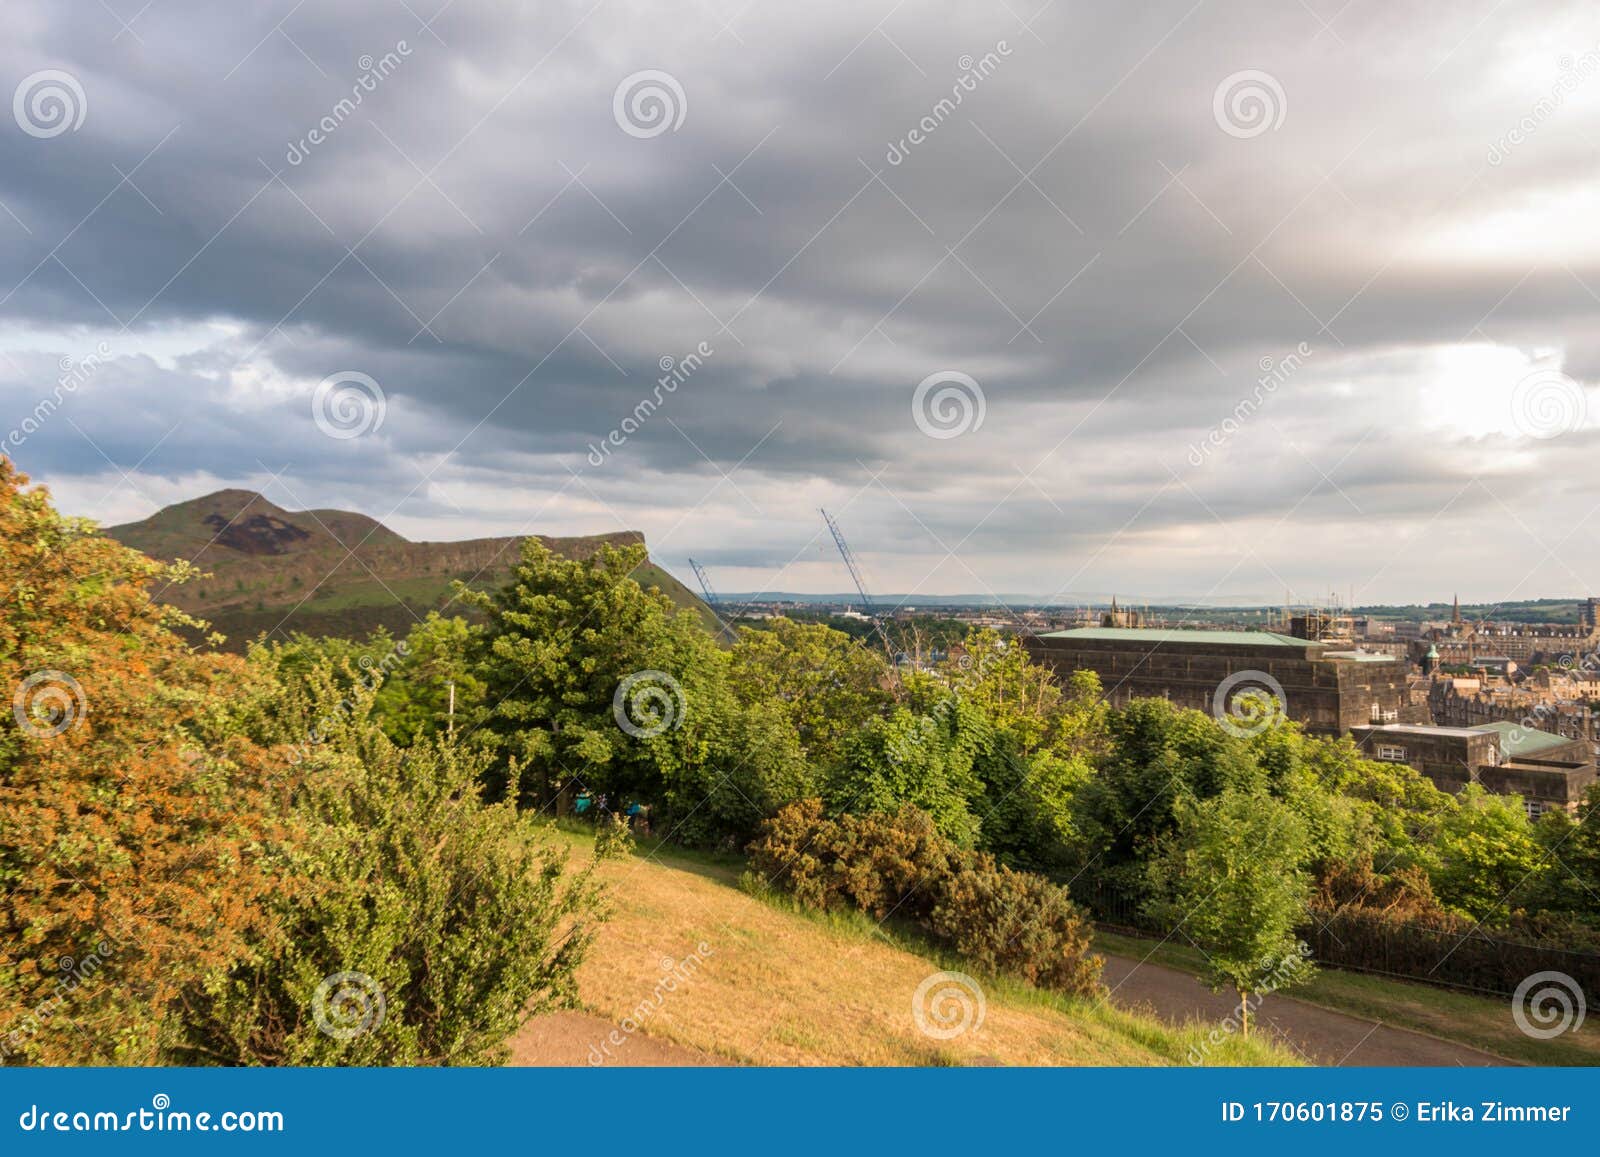 view of scottish mountains with yellow flowers